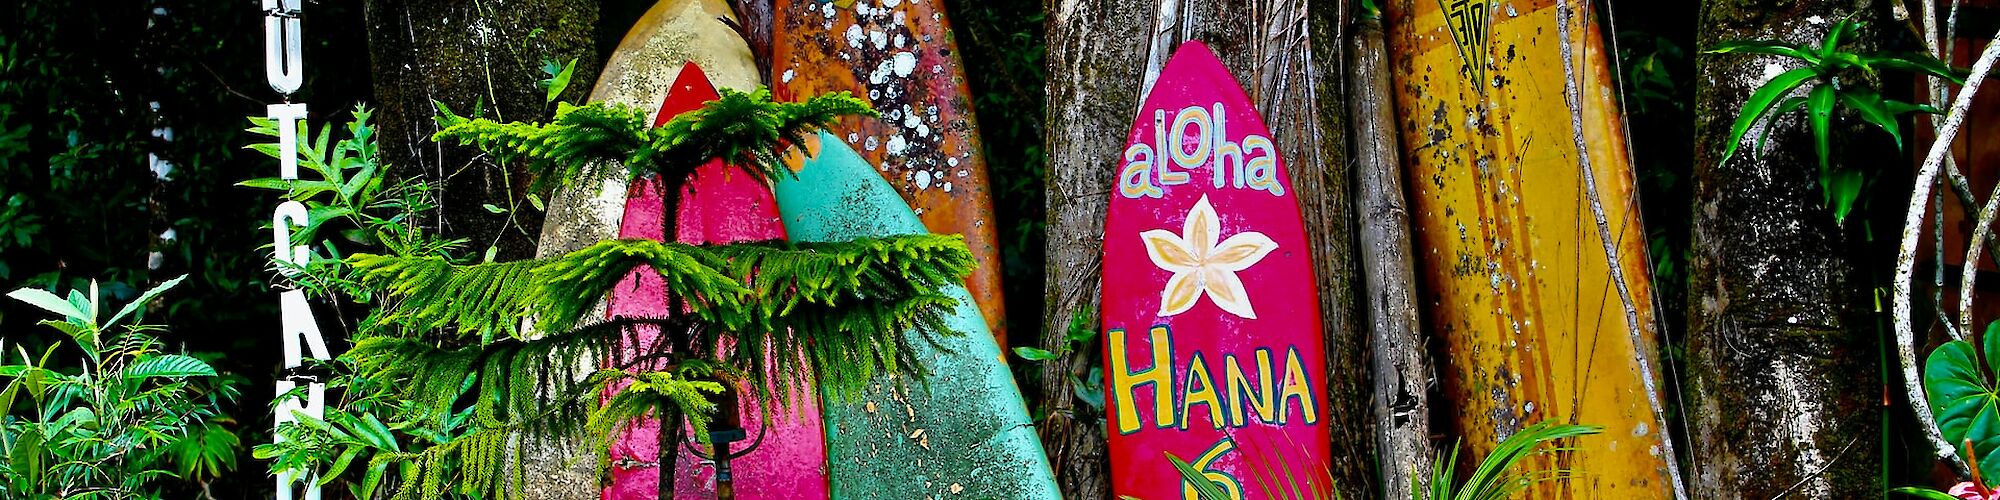 Colorful surfboards with vibrant designs and tropical plants are displayed among trees, with signs indicating "ALOHA" and "COCONUT CANDY."